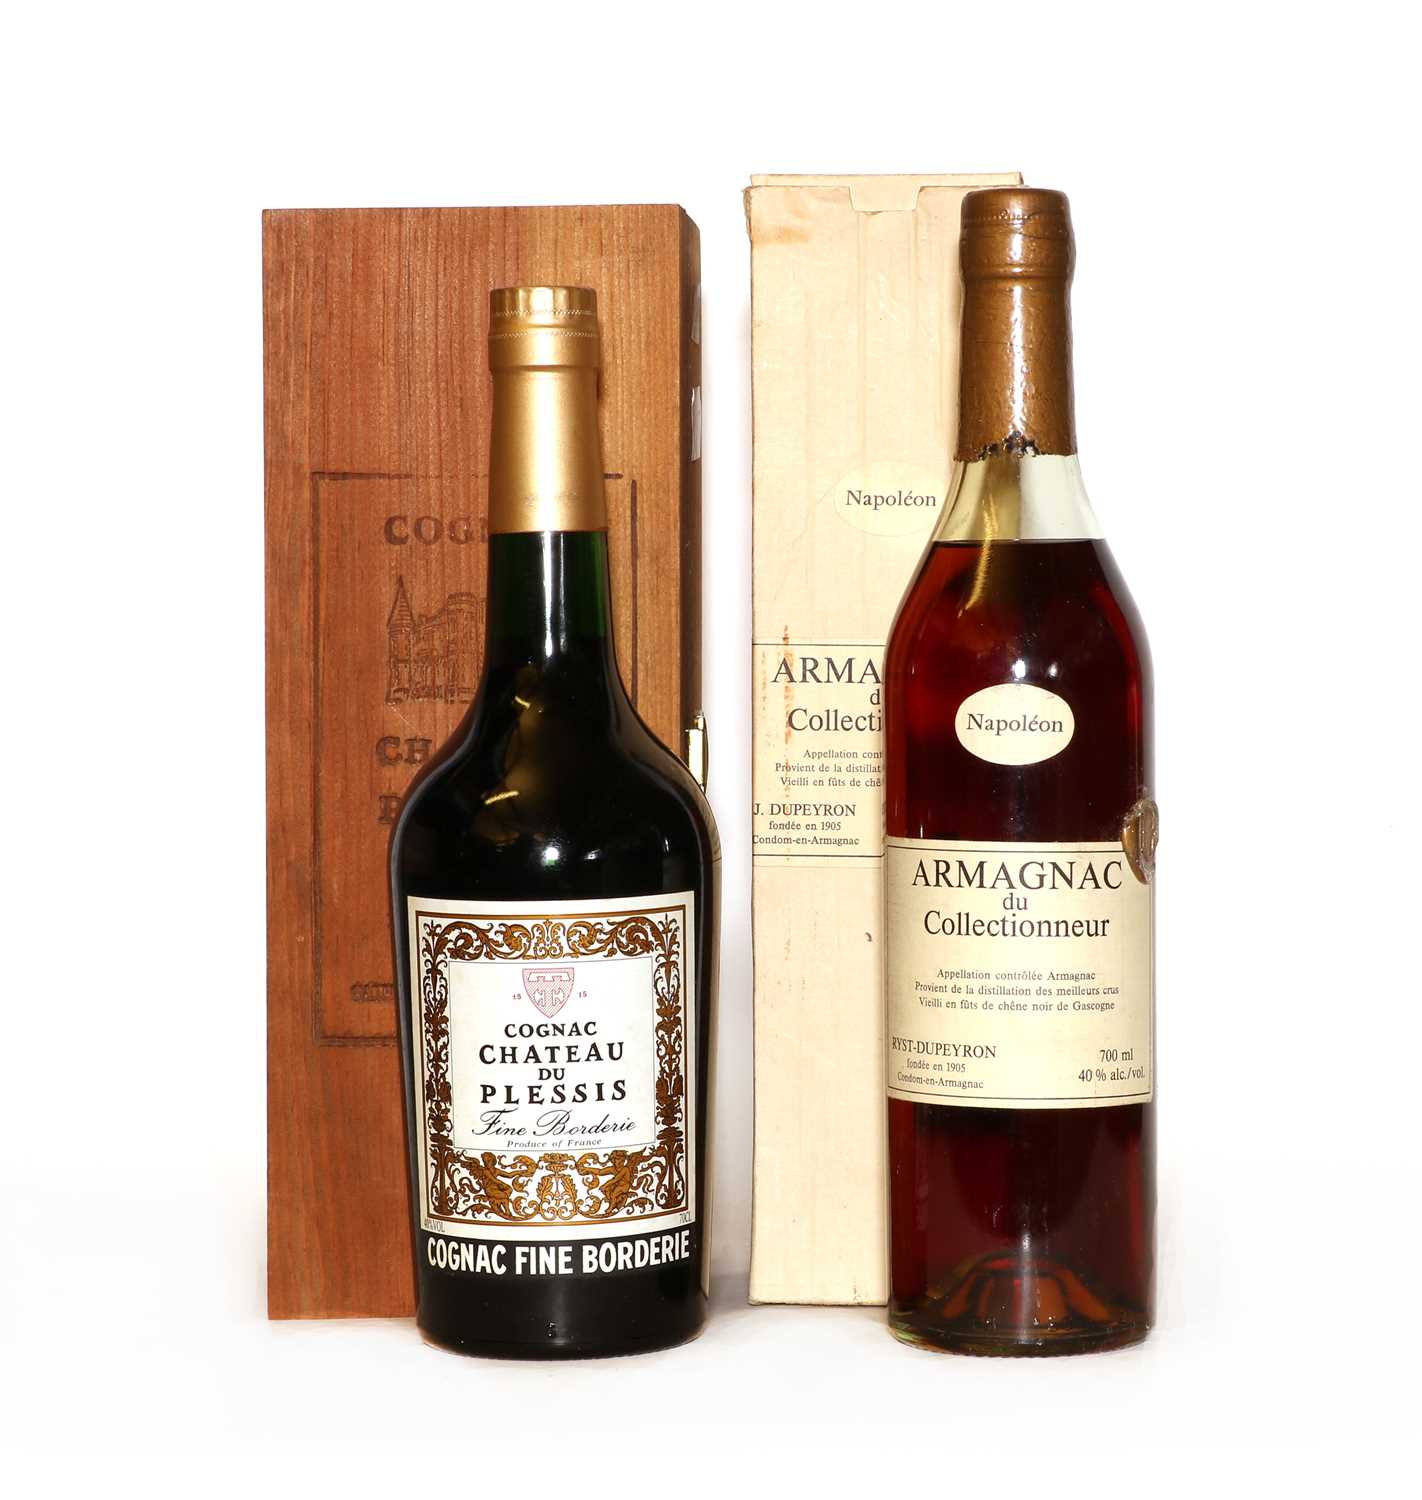 Lot 307 - Chateau du Plessis, Fine Borderie Cognac, 40% vol, 70cl, one bottle (OWC) and one various other